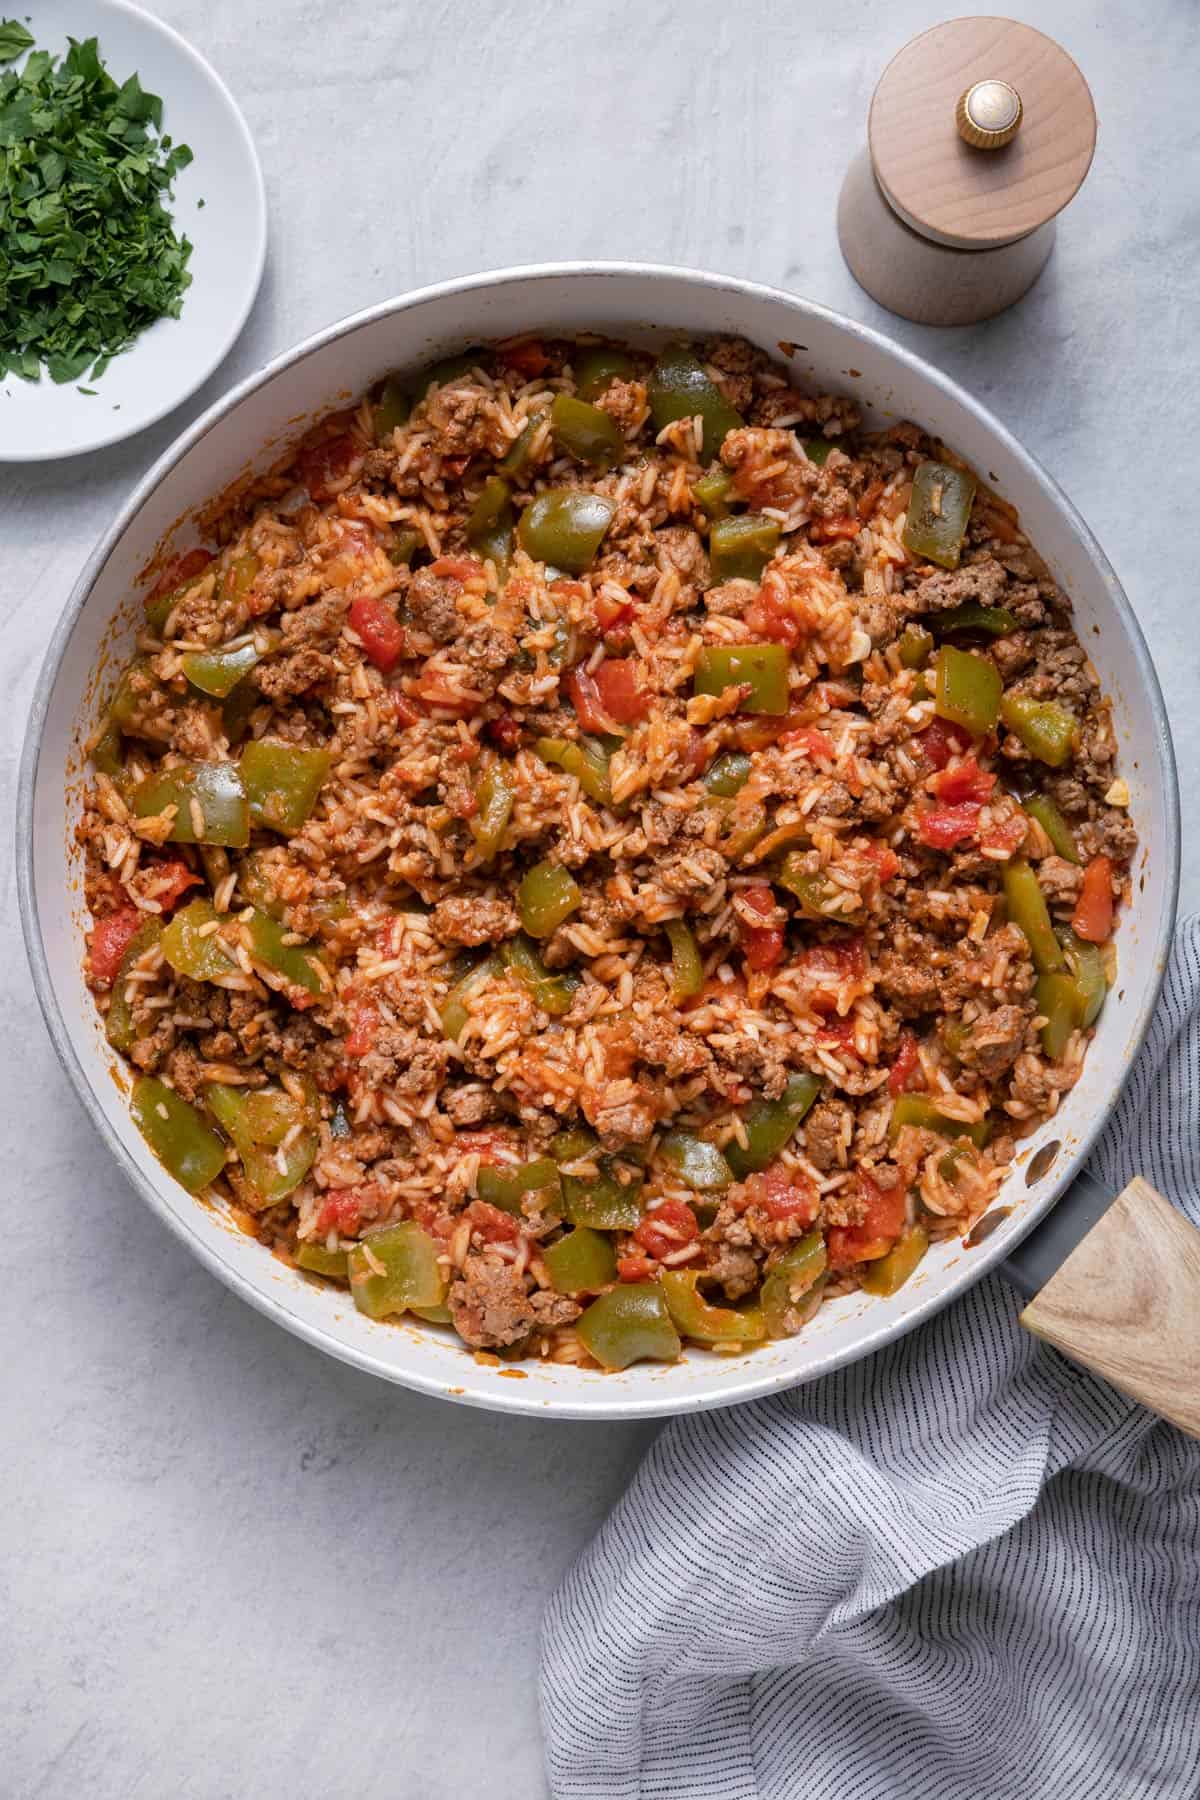 Skillet with the unstuffed peppers recipe before serving